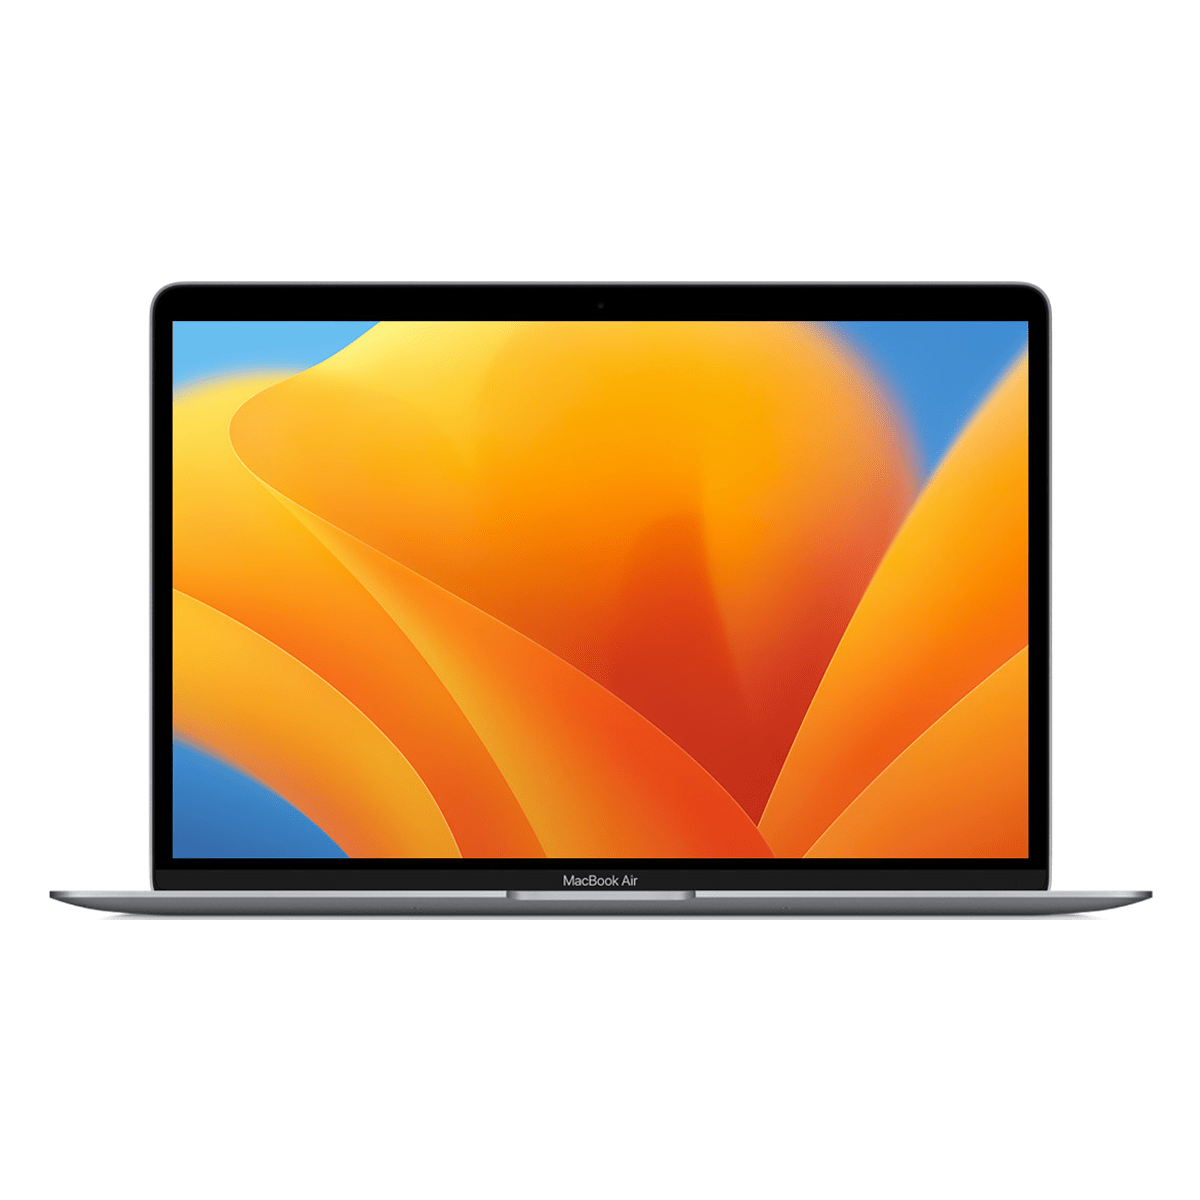 Apple MacBook Air (M1) review: gamechanging speed and battery life, Apple